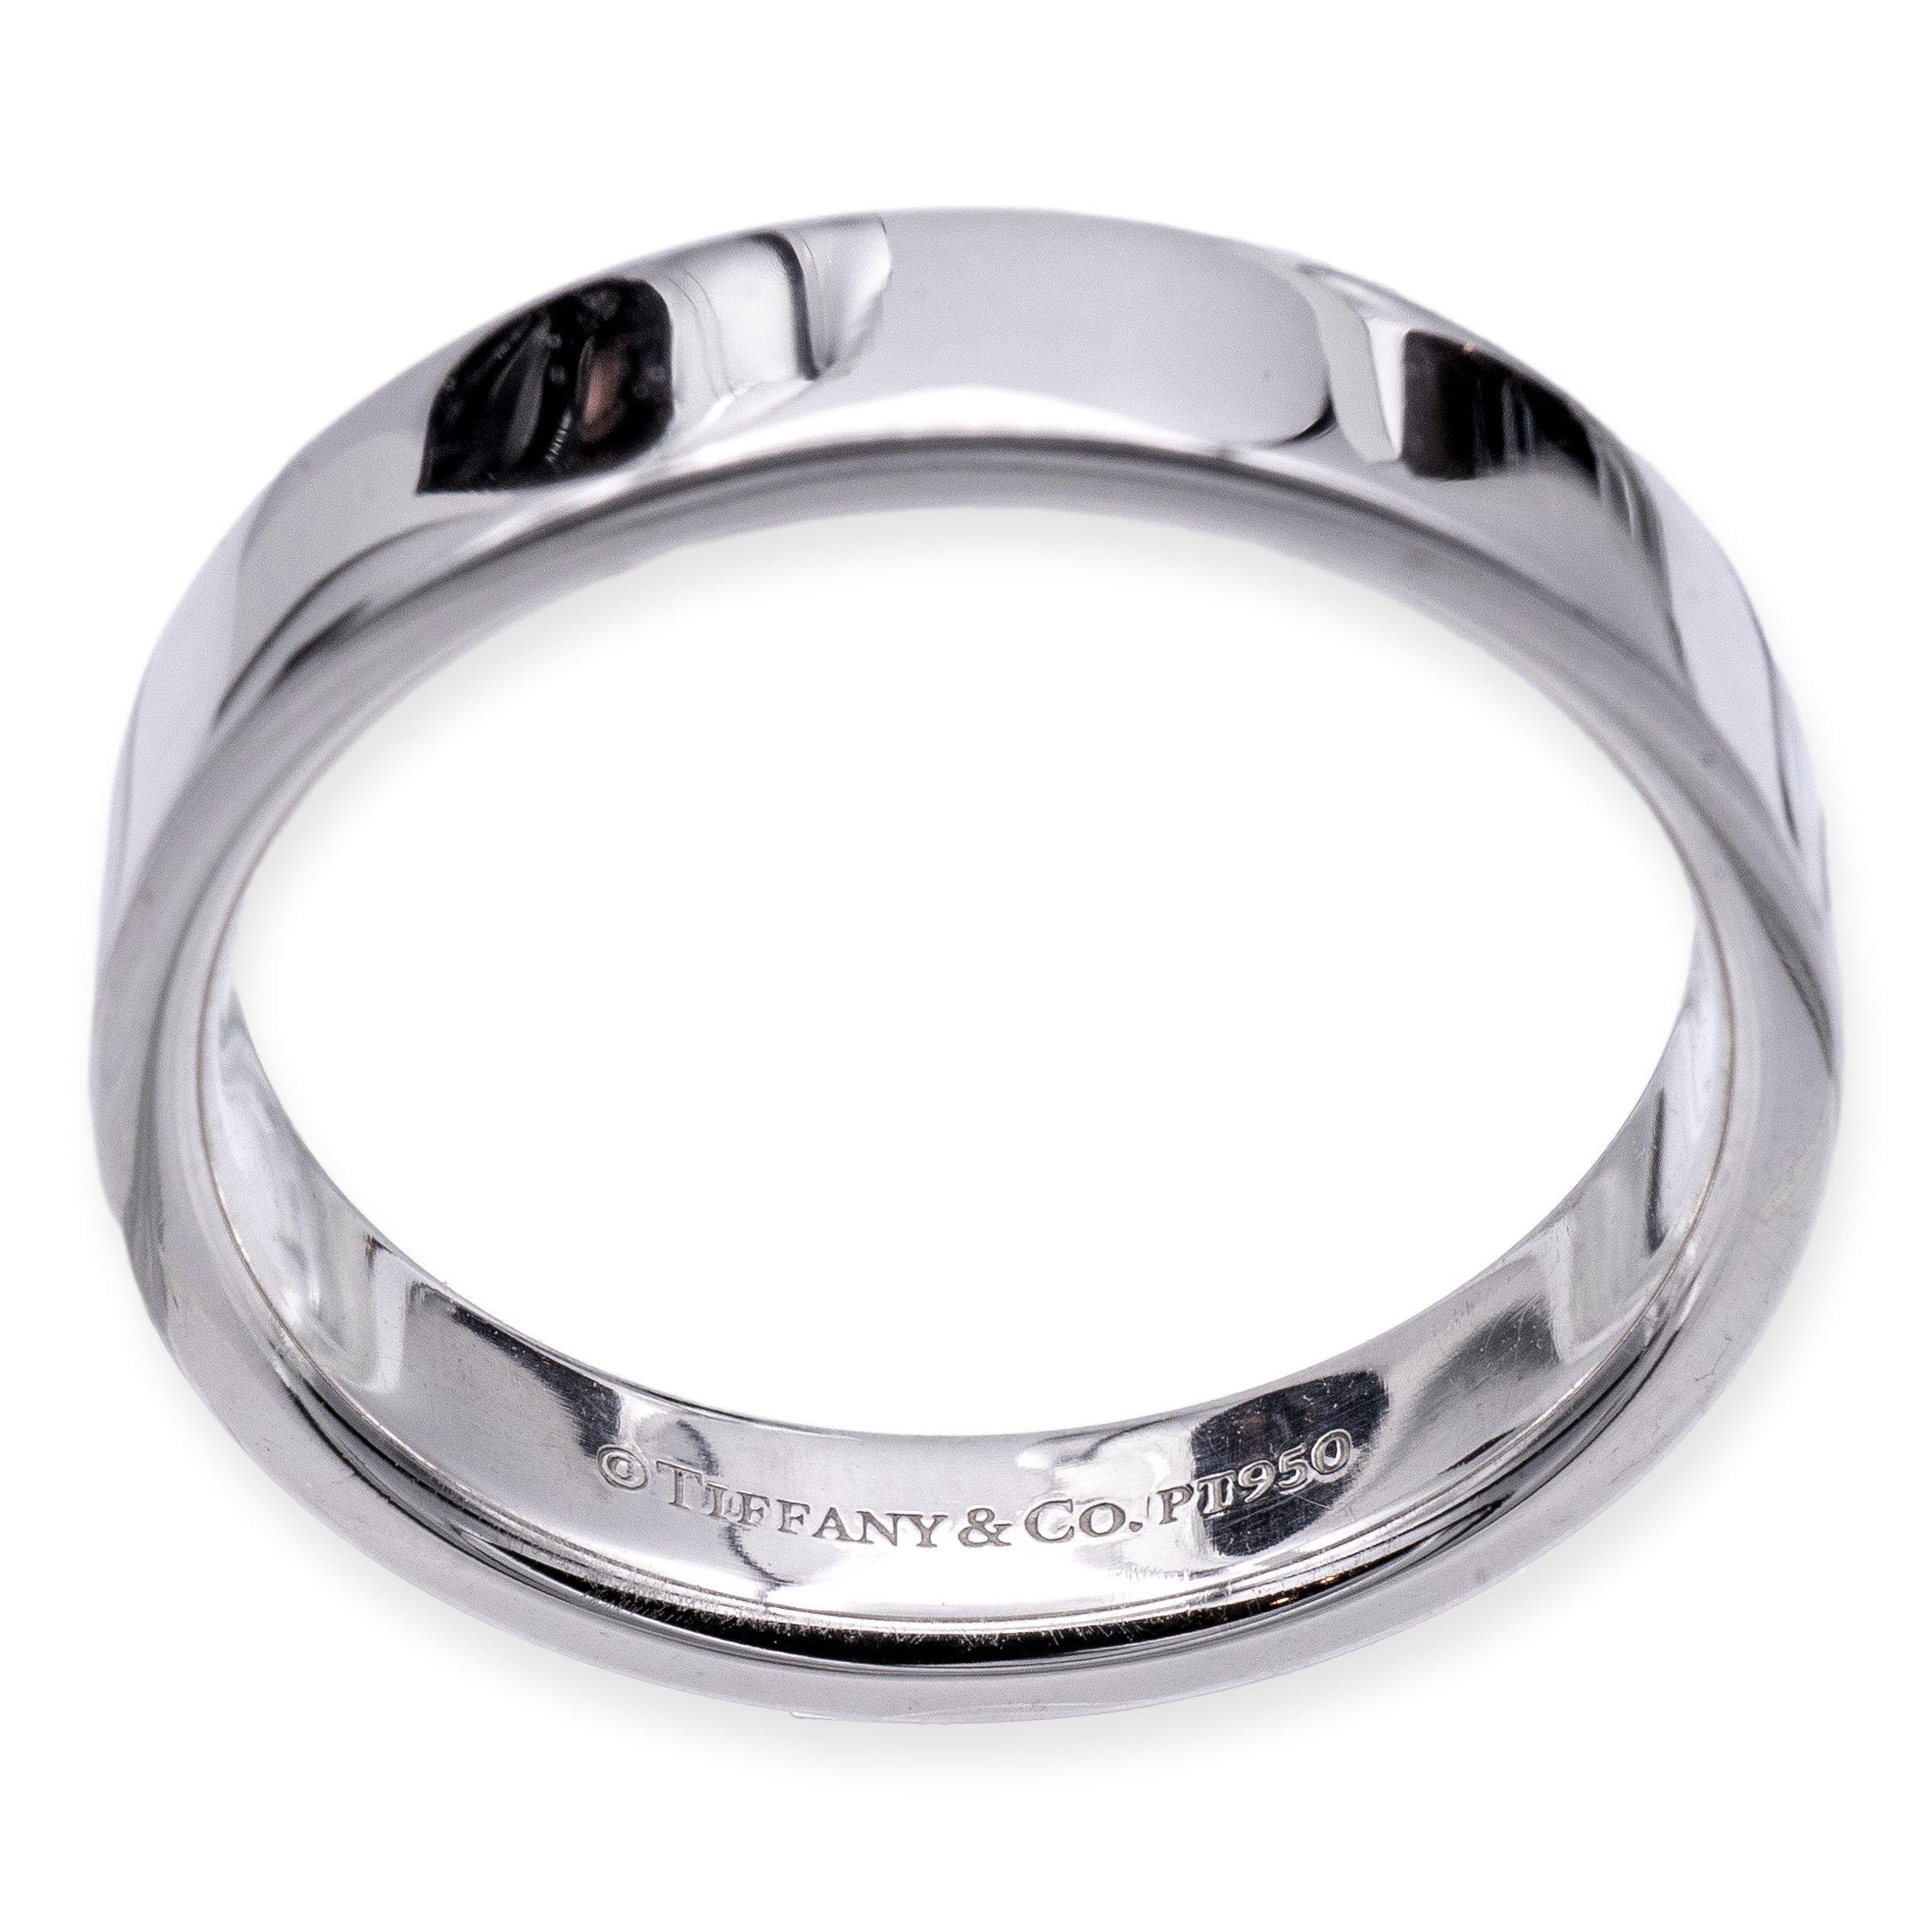 Tiffany & Co. 4mm wedding band ring finely crafted in platinum featuring sleek flat edges. 
Fully hallmarked with Tiffany logo and metal content. 

Ring Specifications
Brand: Tiffany & Co.
Style: Essential Band
Hallmarks: ©Tiffany & Co. PT950
Finger